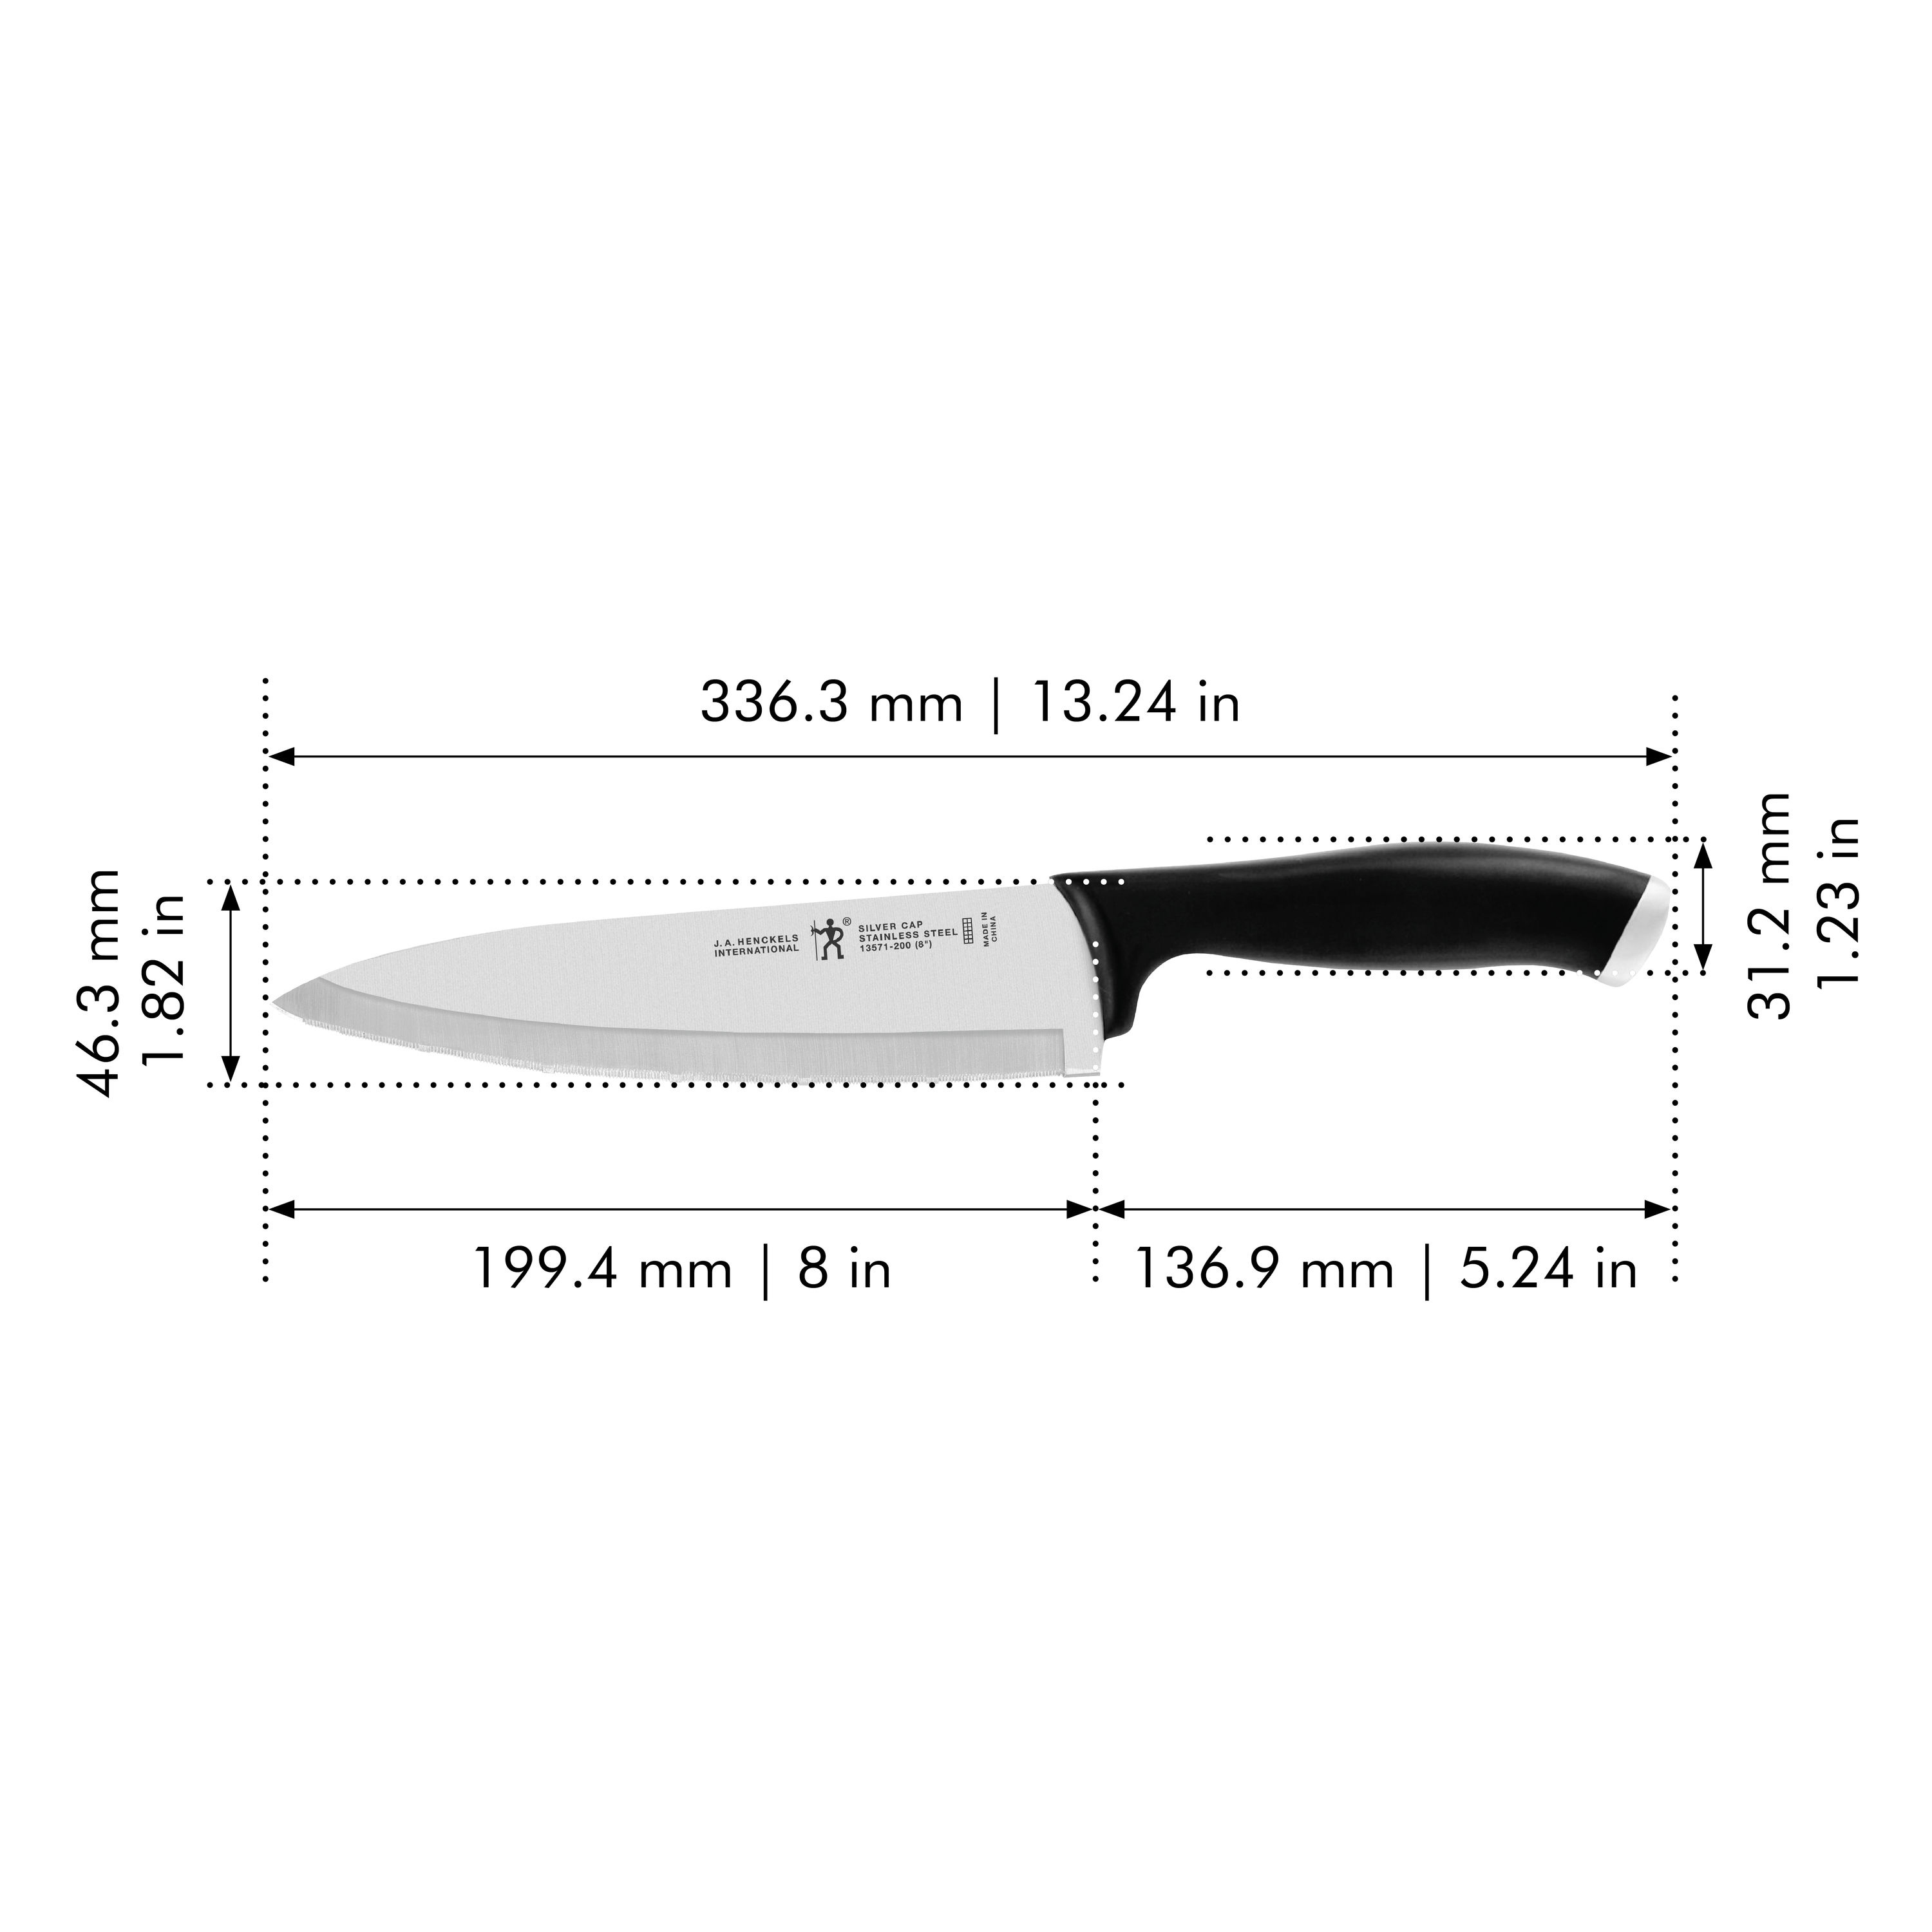 Global 8-Inch Chef's Knife, Size: 8 inch, Silver